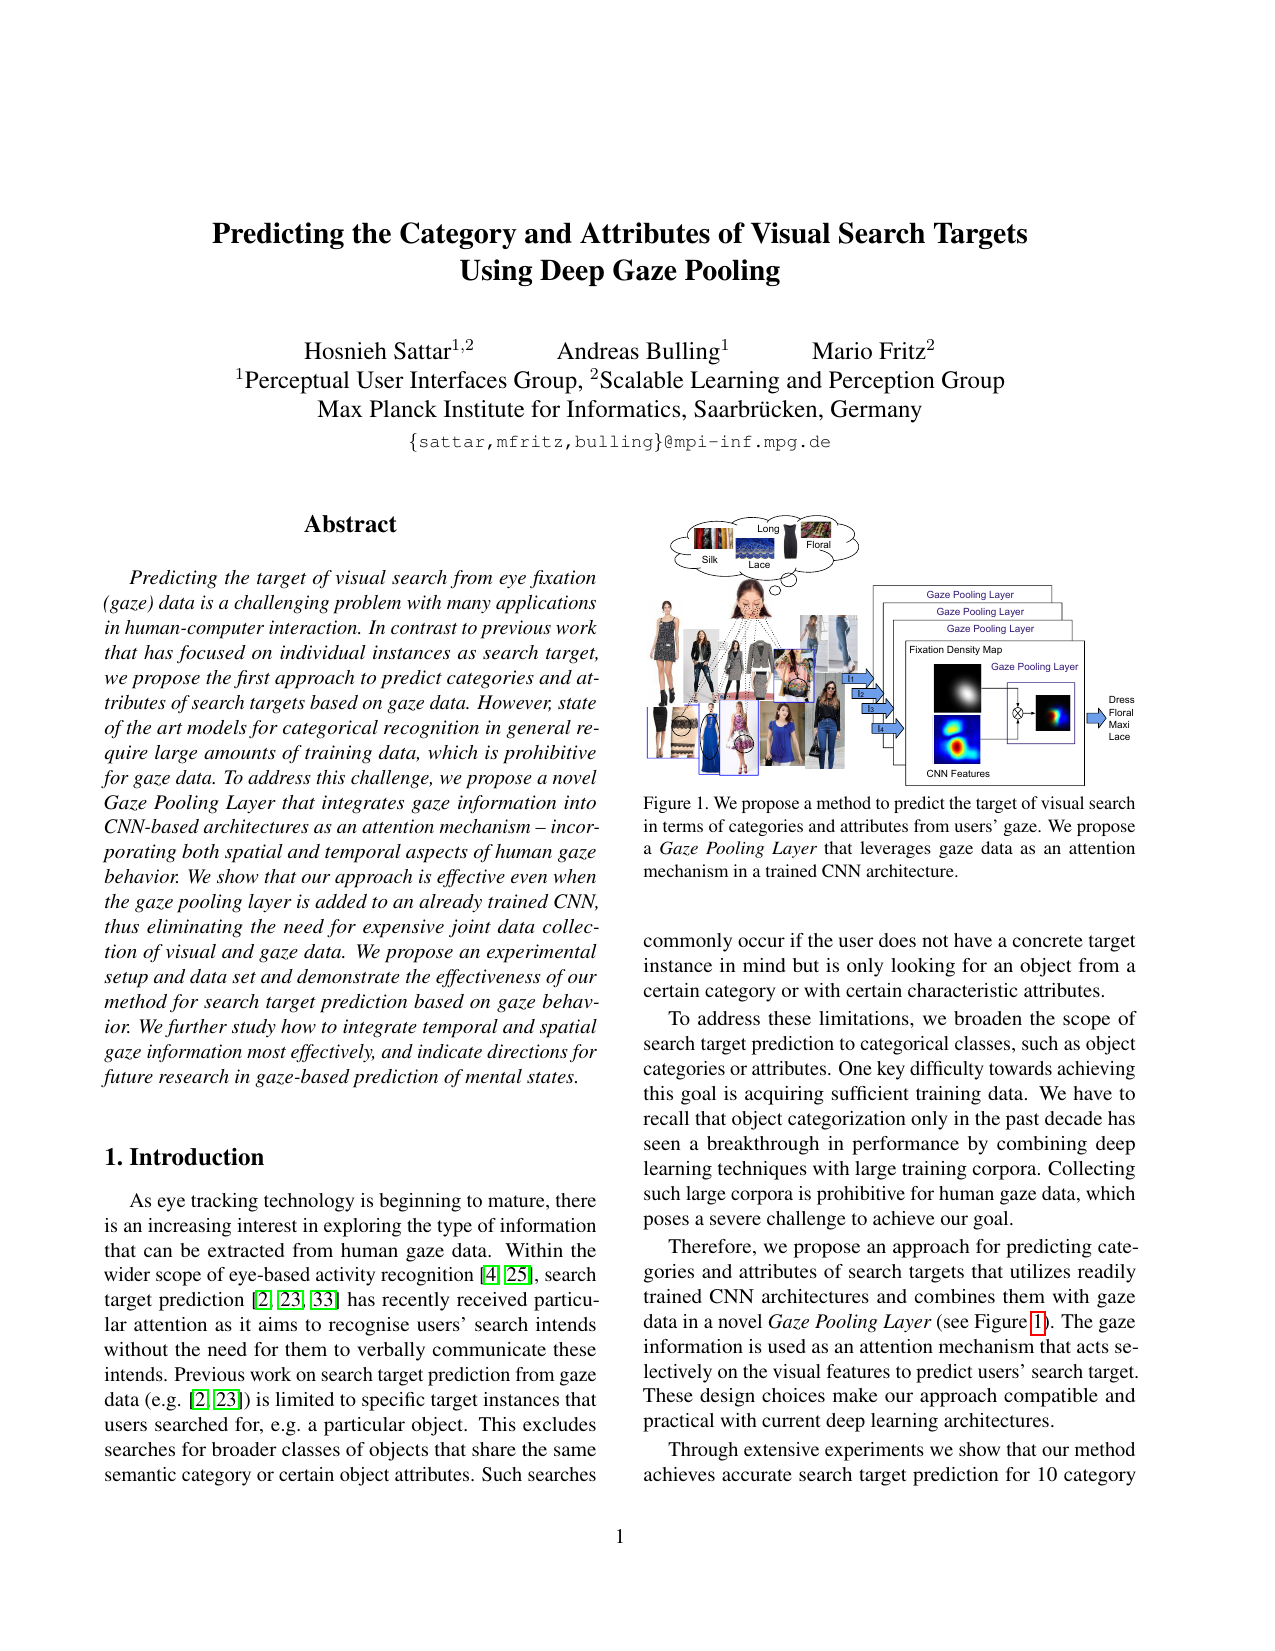 Predicting the Category and Attributes of Visual Search Targets Using Deep Gaze Pooling